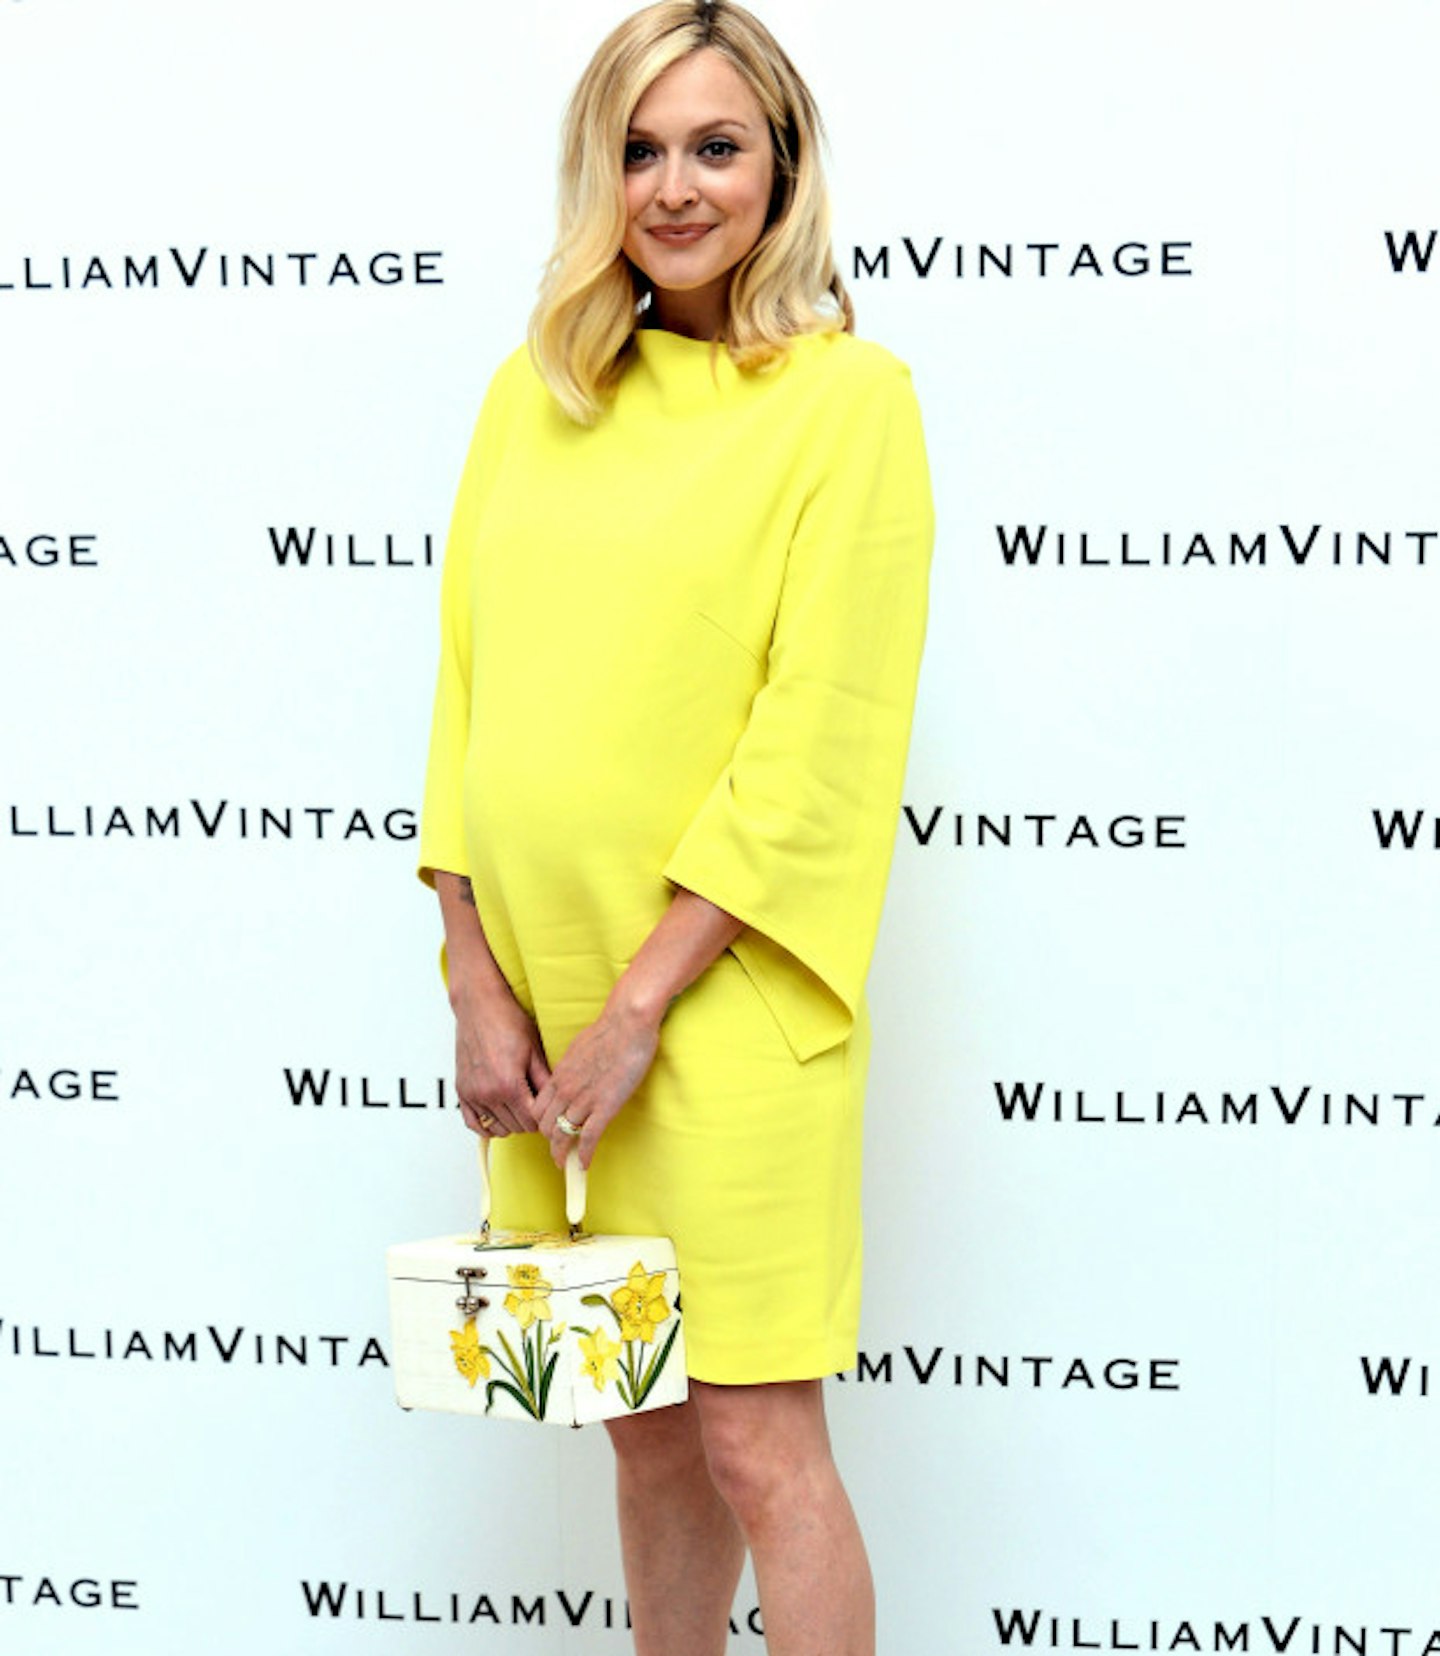 Bright yellow, again another iconic bag to add to the simplistic dress.